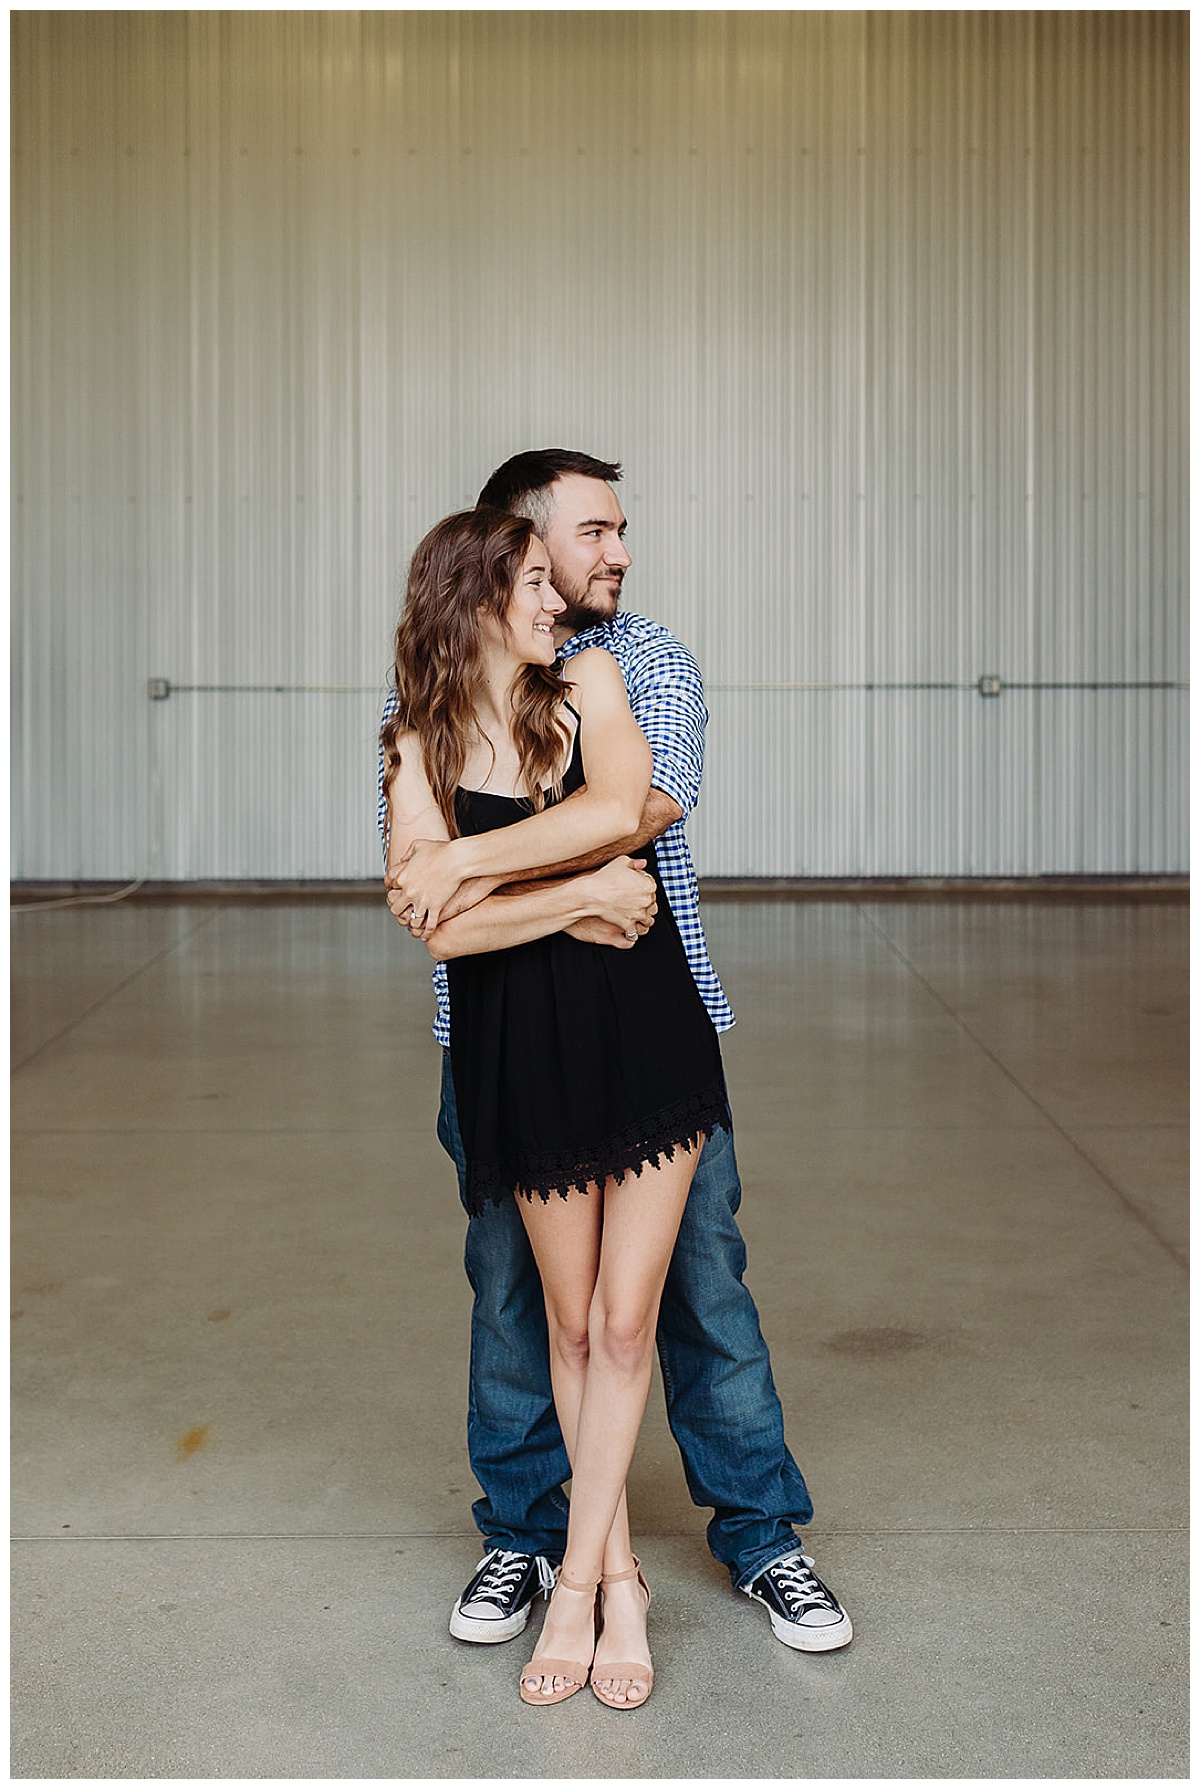 Two people dance together for Detroit Wedding Photographer